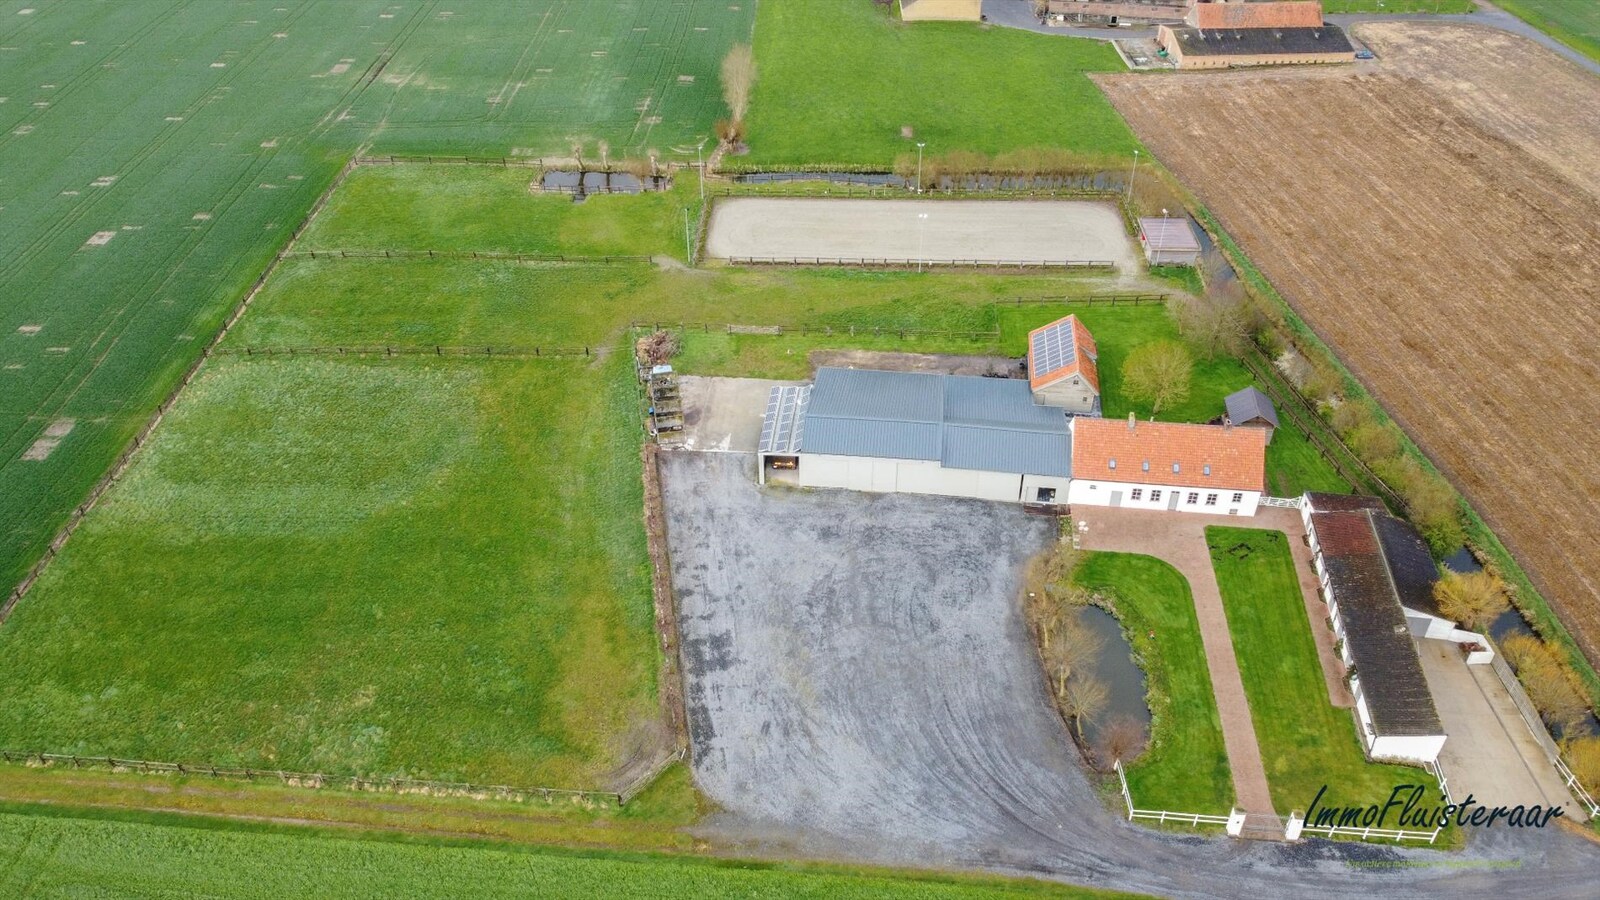 Idyllic farm with barns and pasture on approximately 1.6 hectares. 